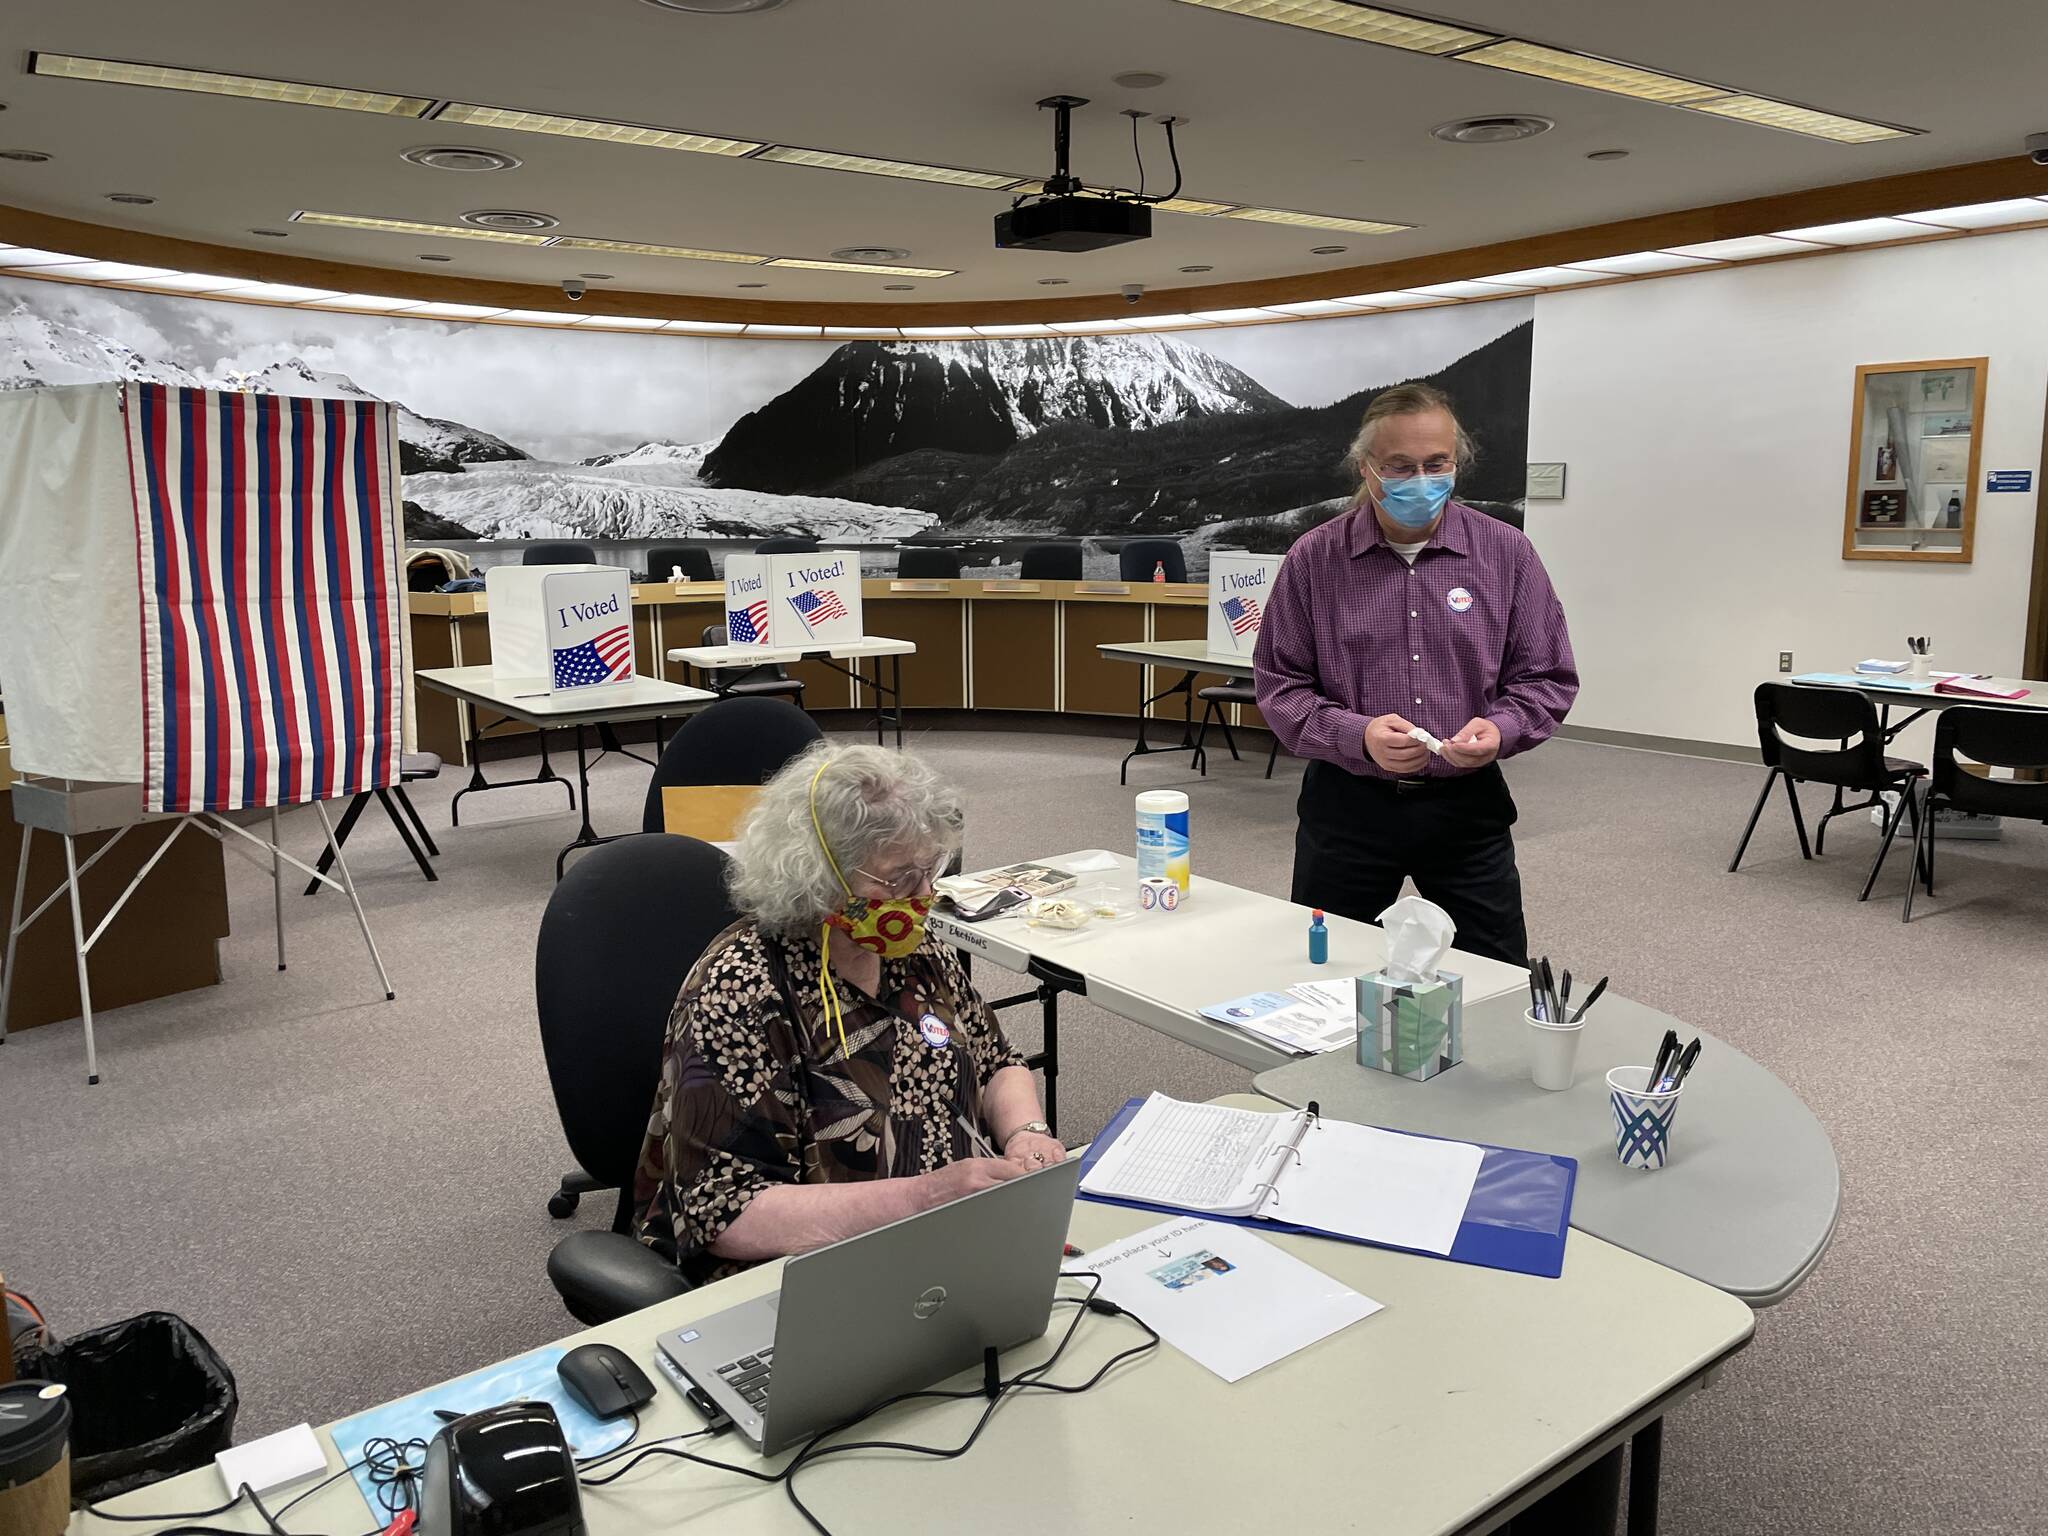 Election workers Nora Laughlin and Bob Laurie man the City Hall election station on the last day of voting for Juneau’s municipal election, Oct. 5, 2021. (Michael S. Lockett / Juneau Empire)